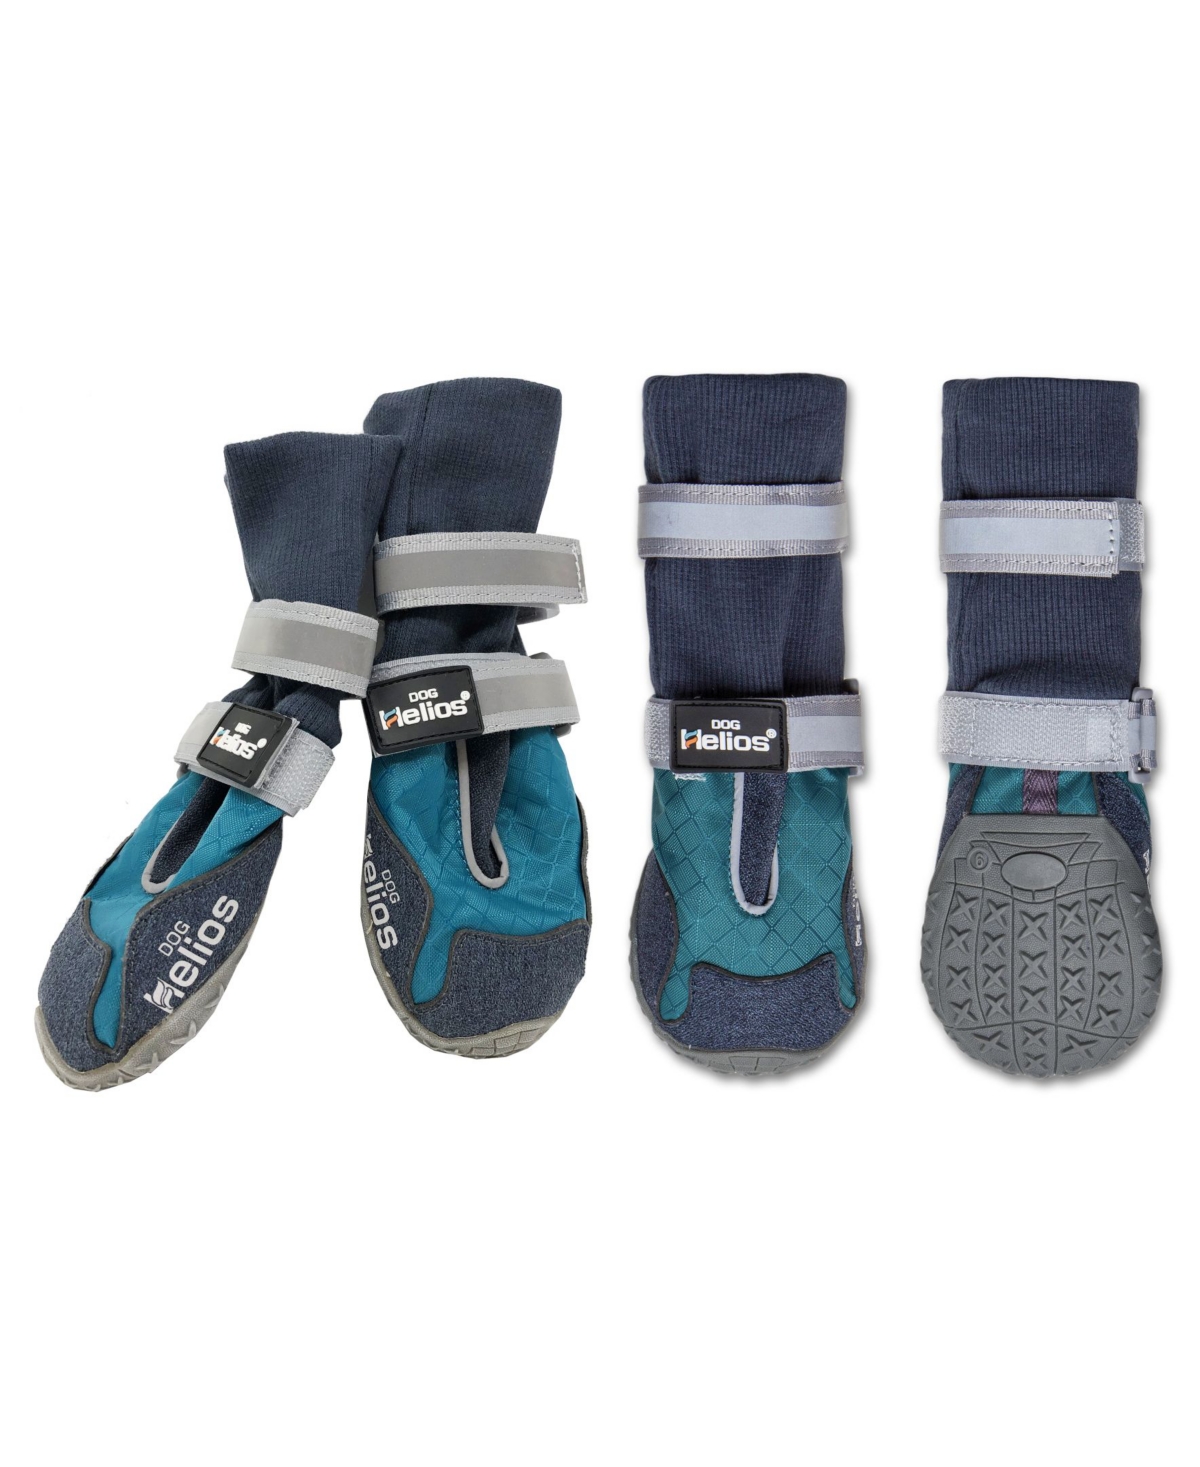 'Traverse' Premium Grip High-Ankle Outdoor Dog Boots - Blue